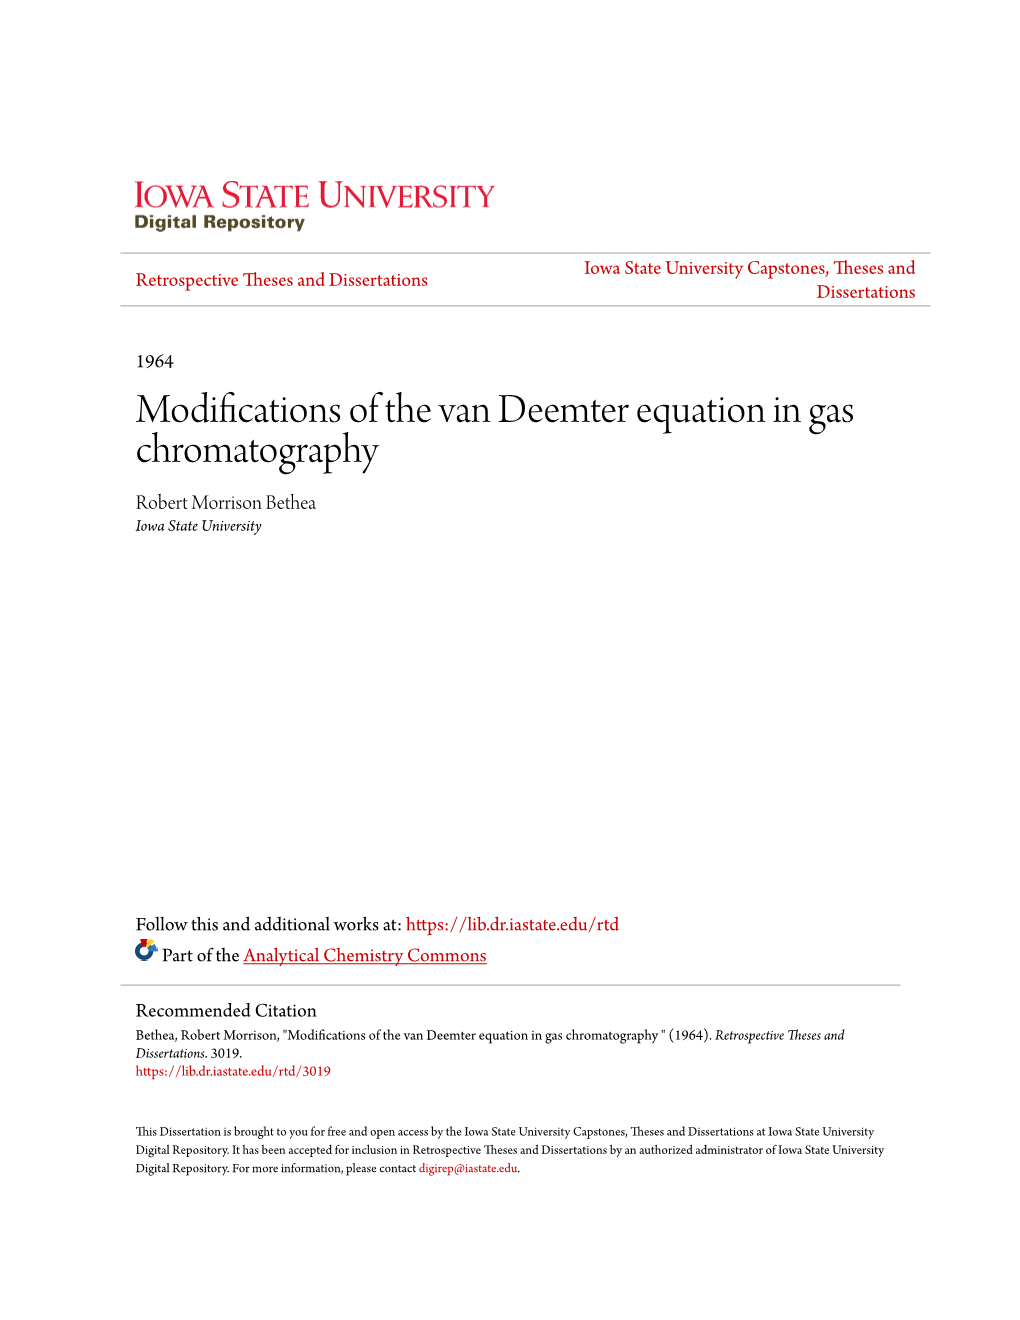 Modifications of the Van Deemter Equation in Gas Chromatography Robert Morrison Bethea Iowa State University